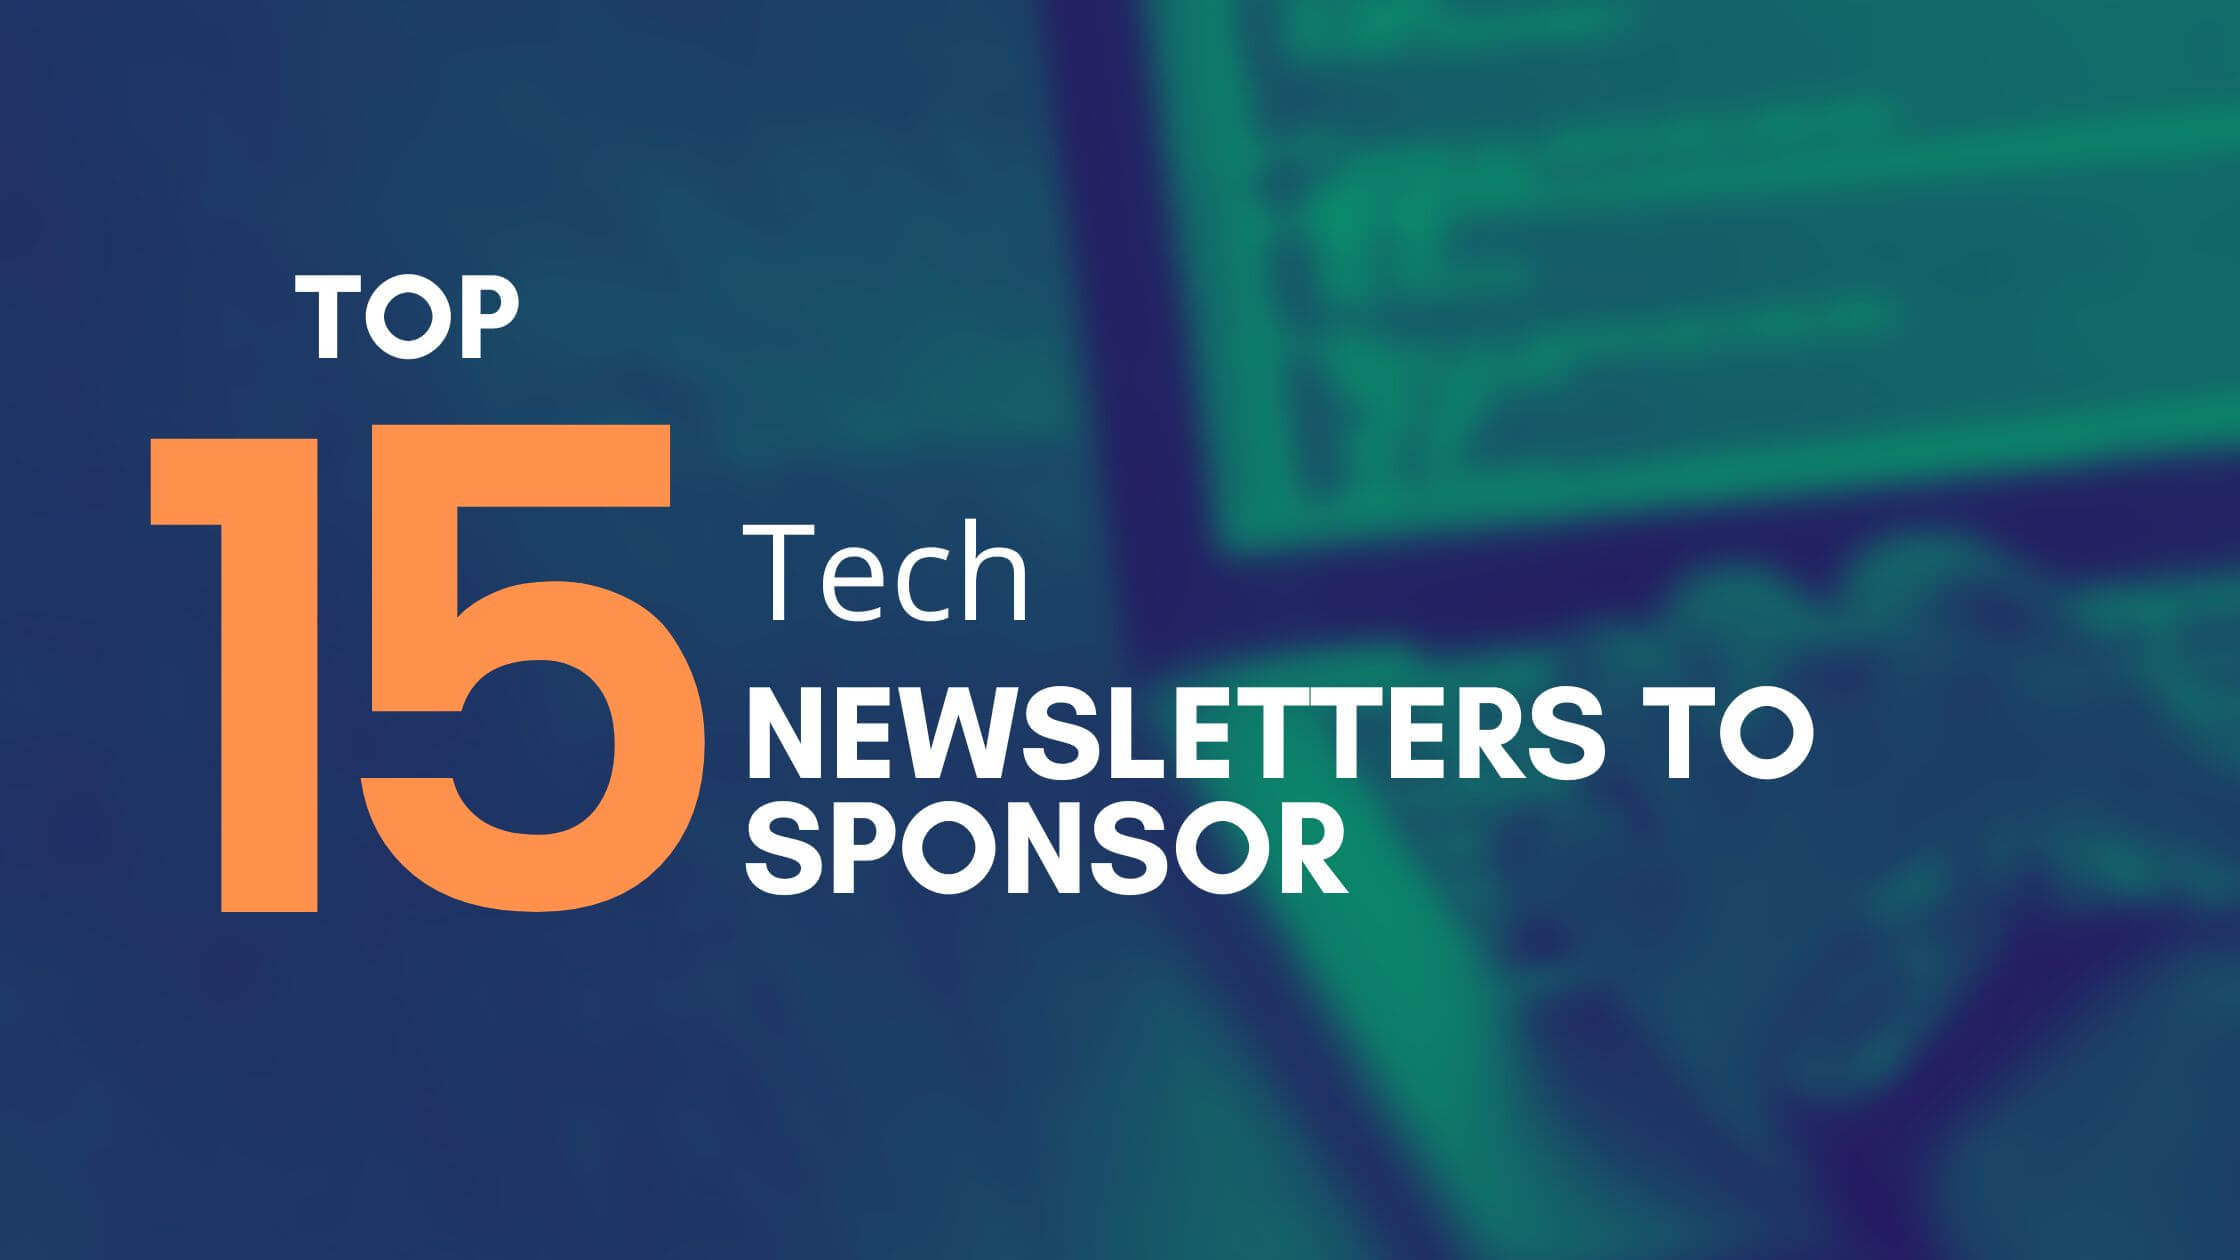 Top 15 Tech Newsletters to Sponsor image